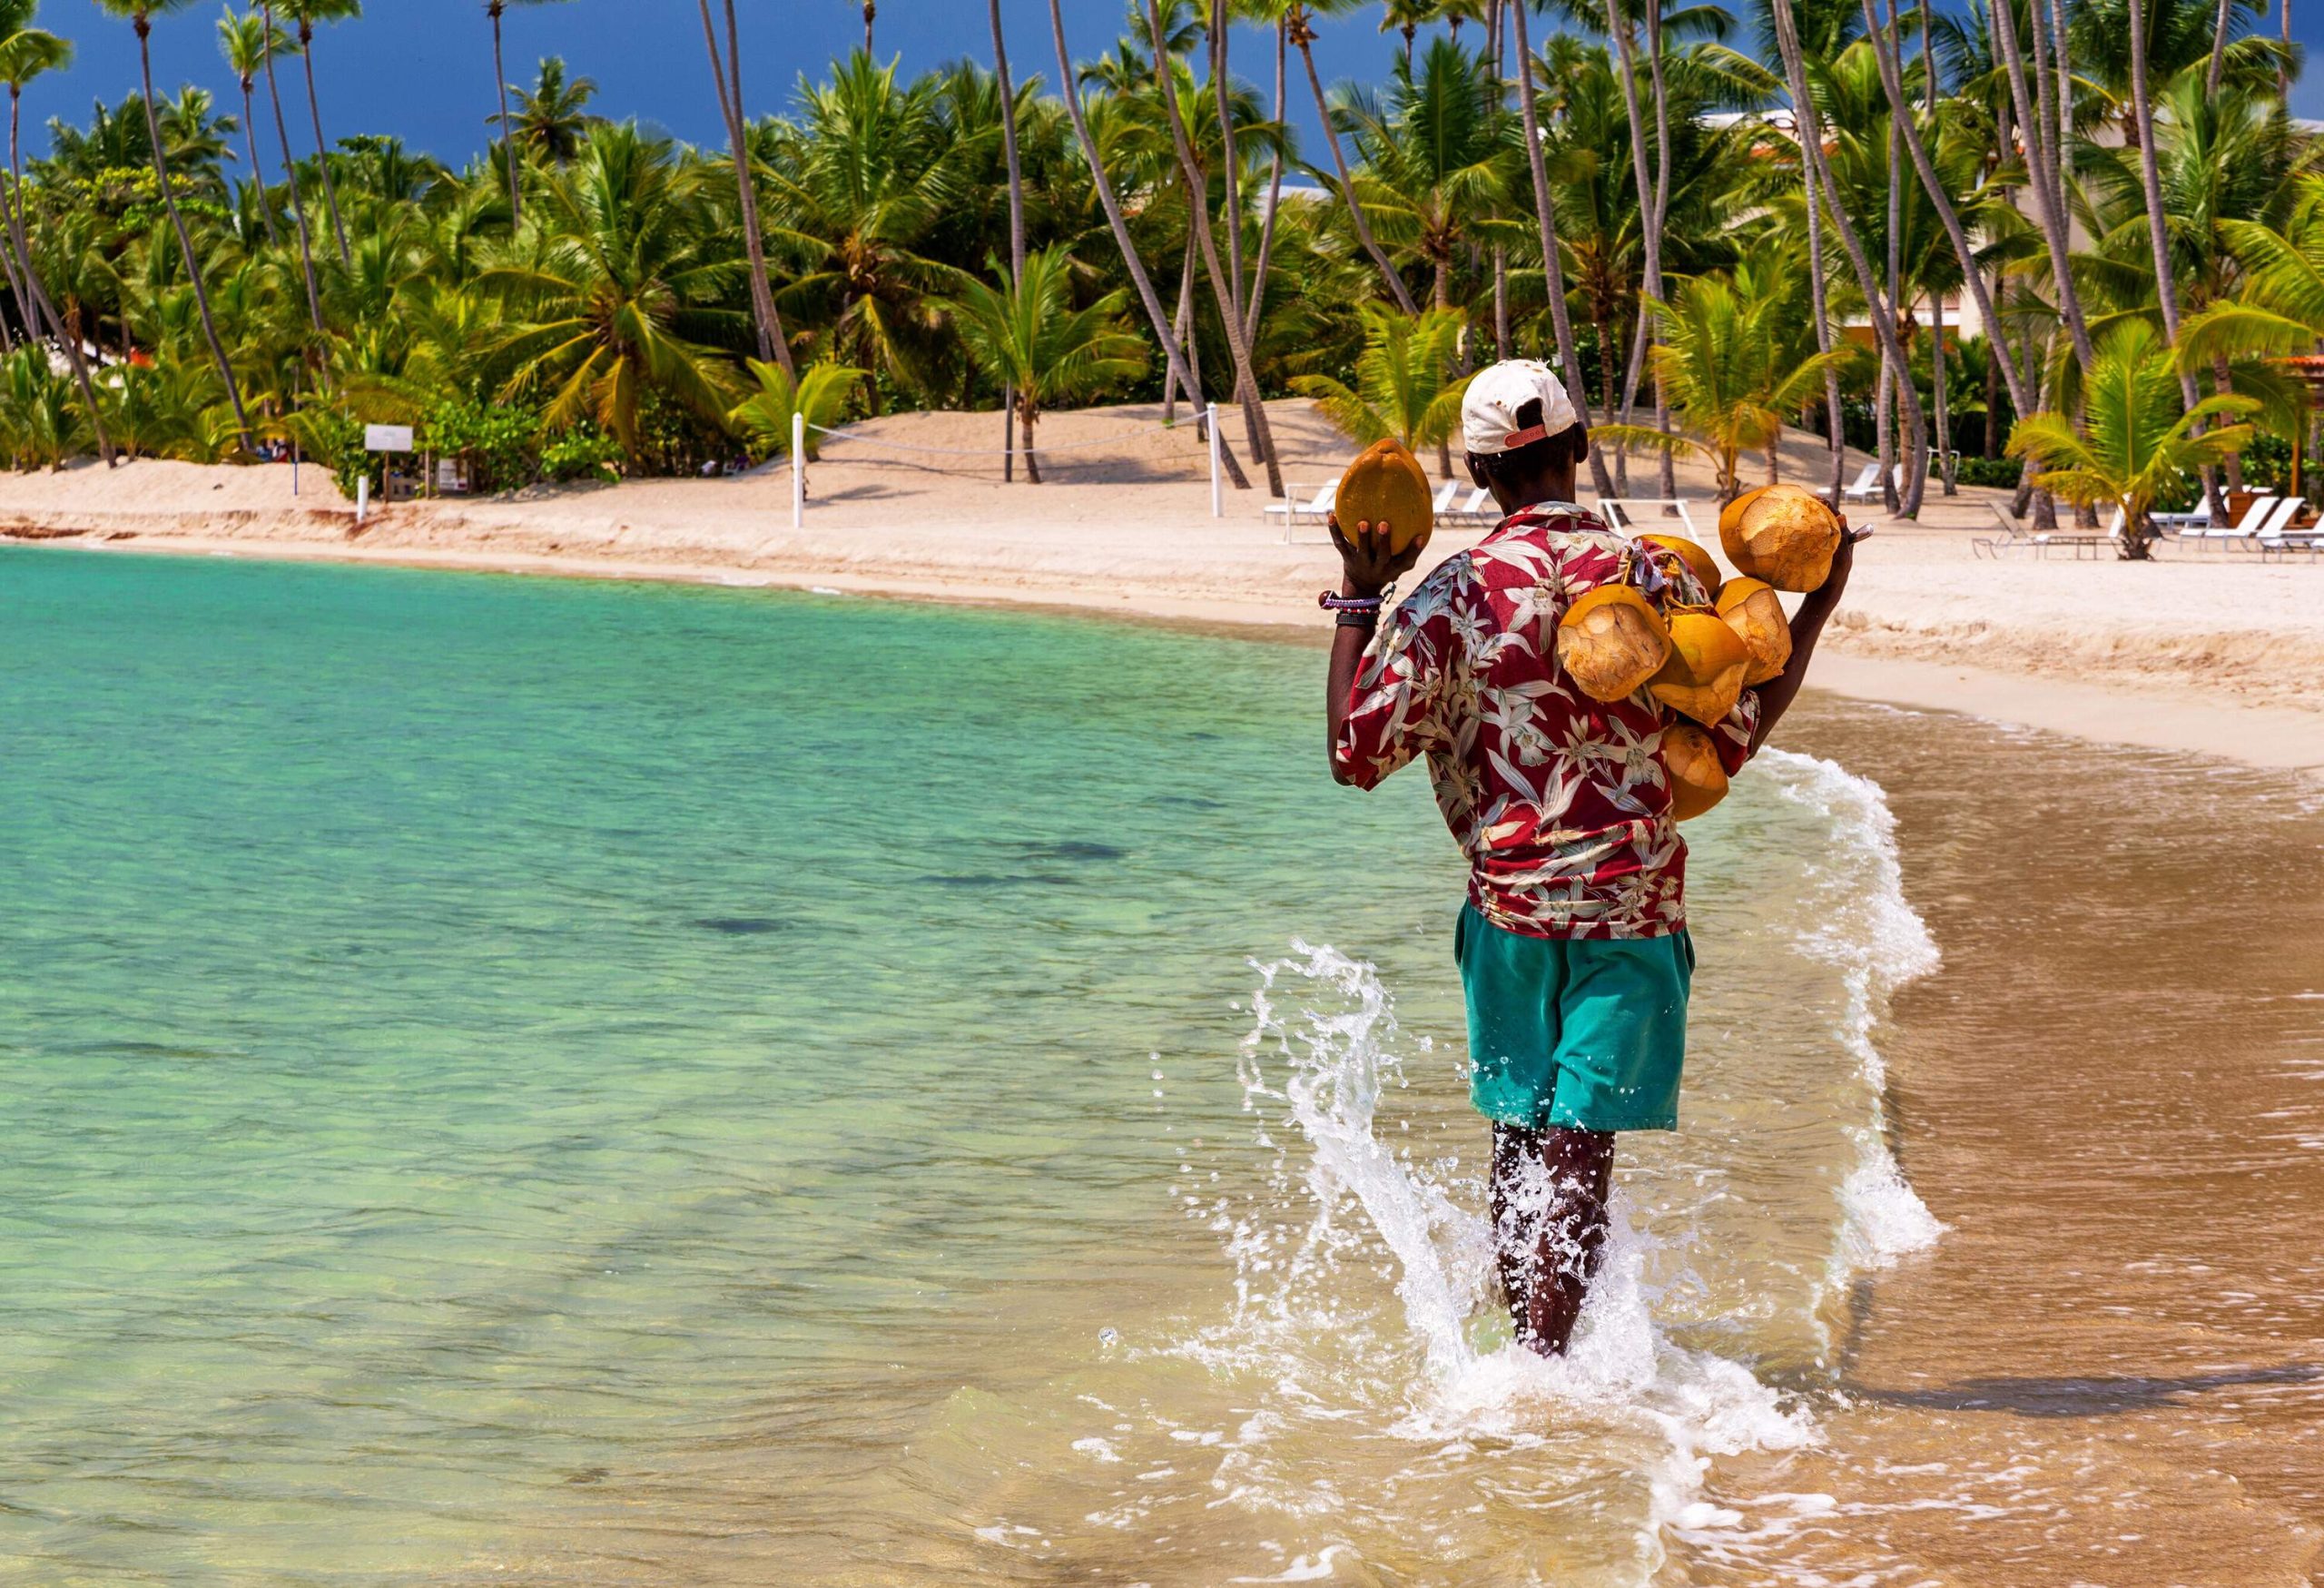 A man in a printed shirt and white cap carries coconuts as he walks on the shallow waters of a beach towards a grove of palm trees.